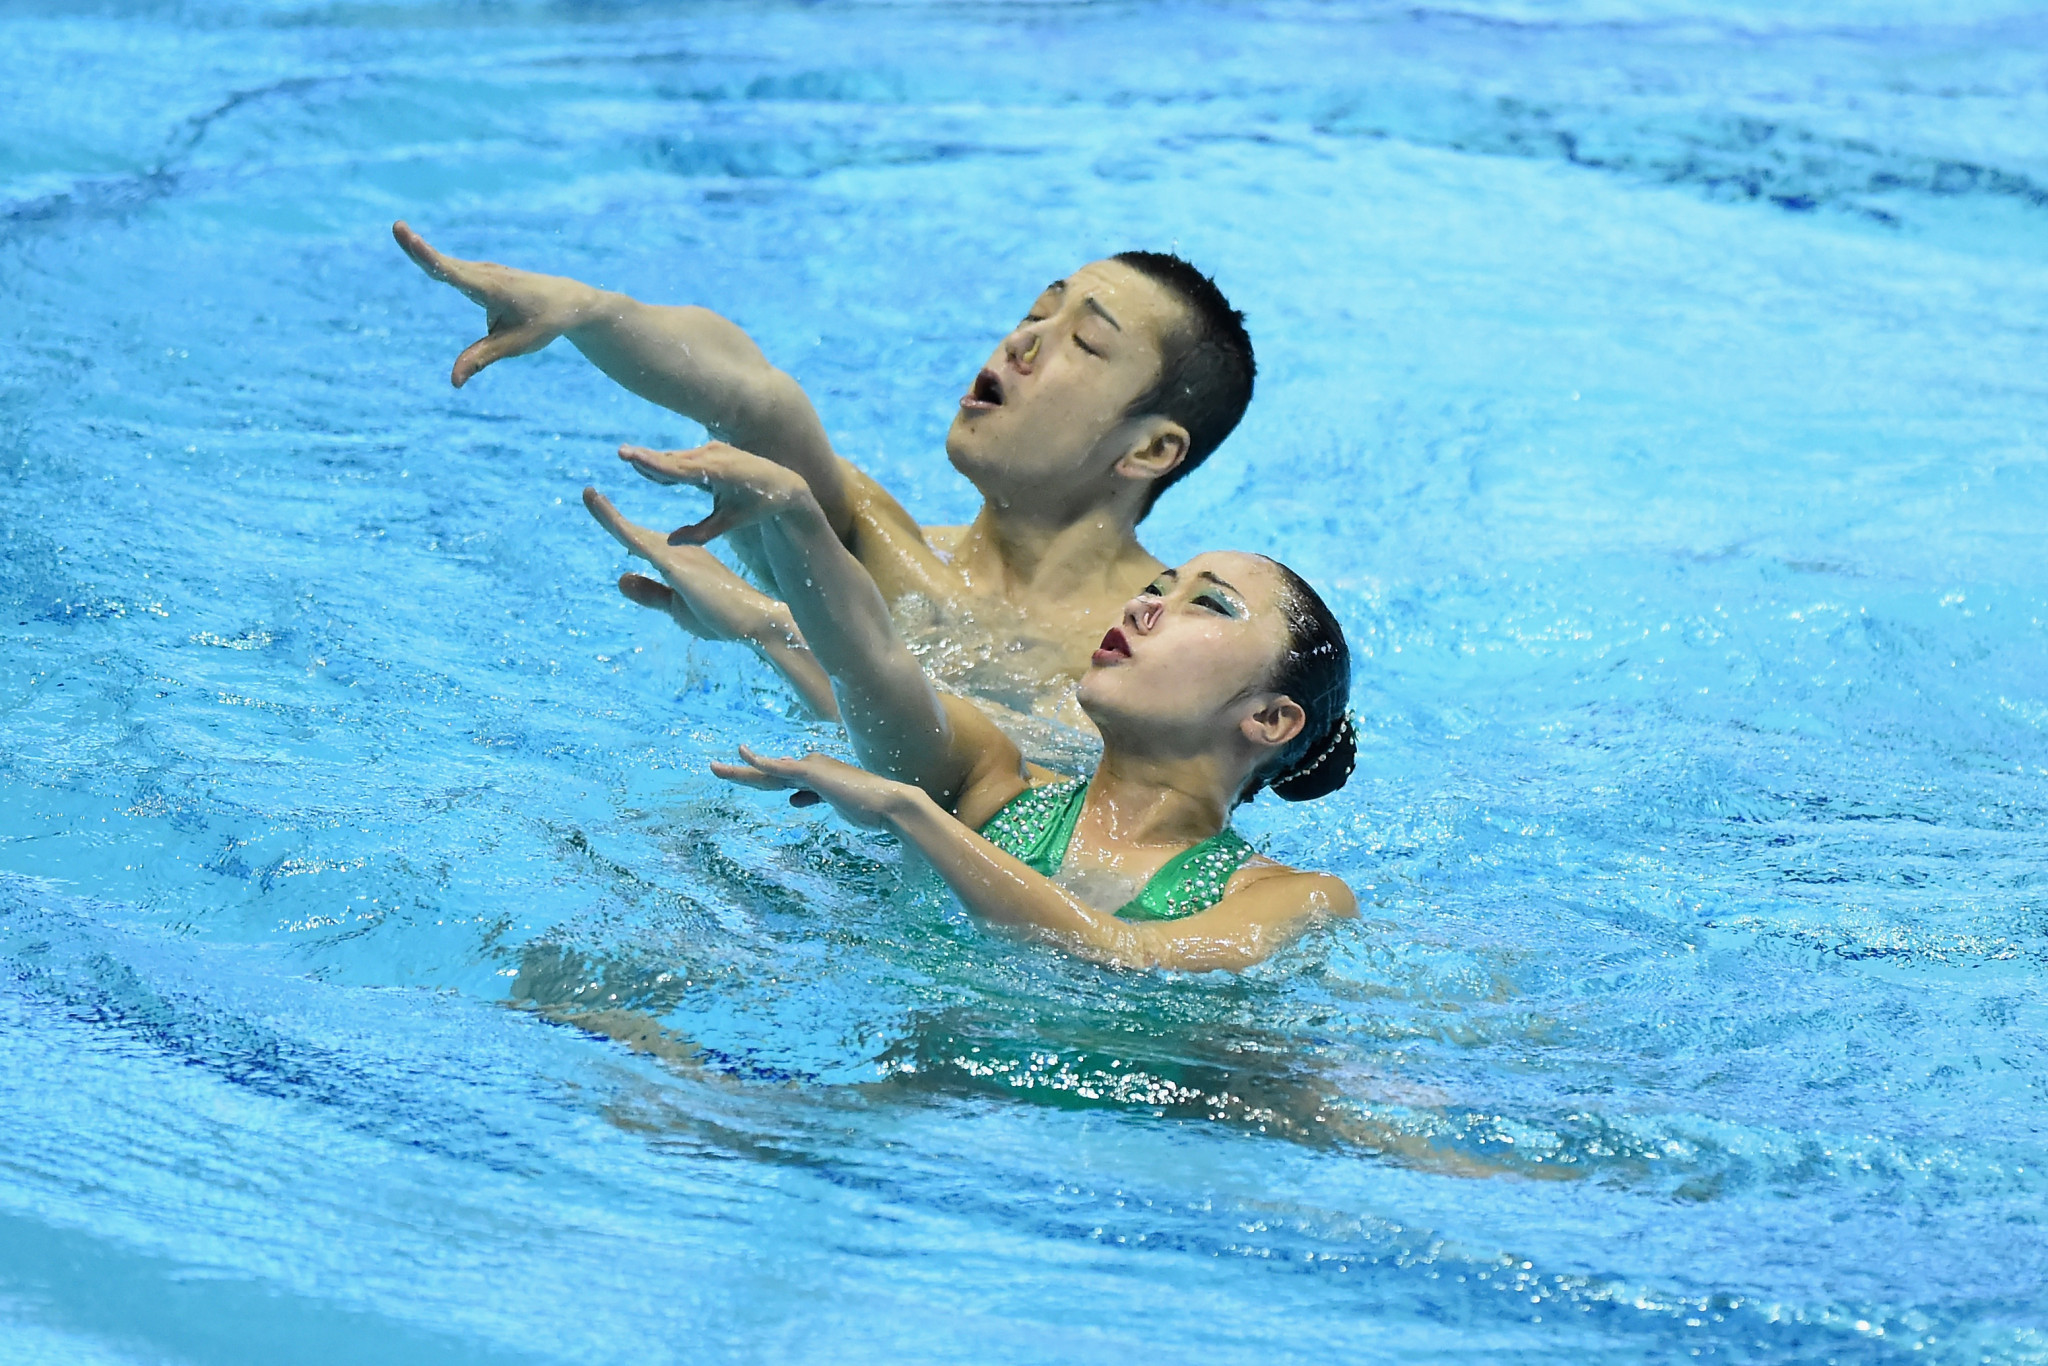 Japan and Italy earn mixed duet titles at FINA Artistic Swimming World Series in Alexandroupolis